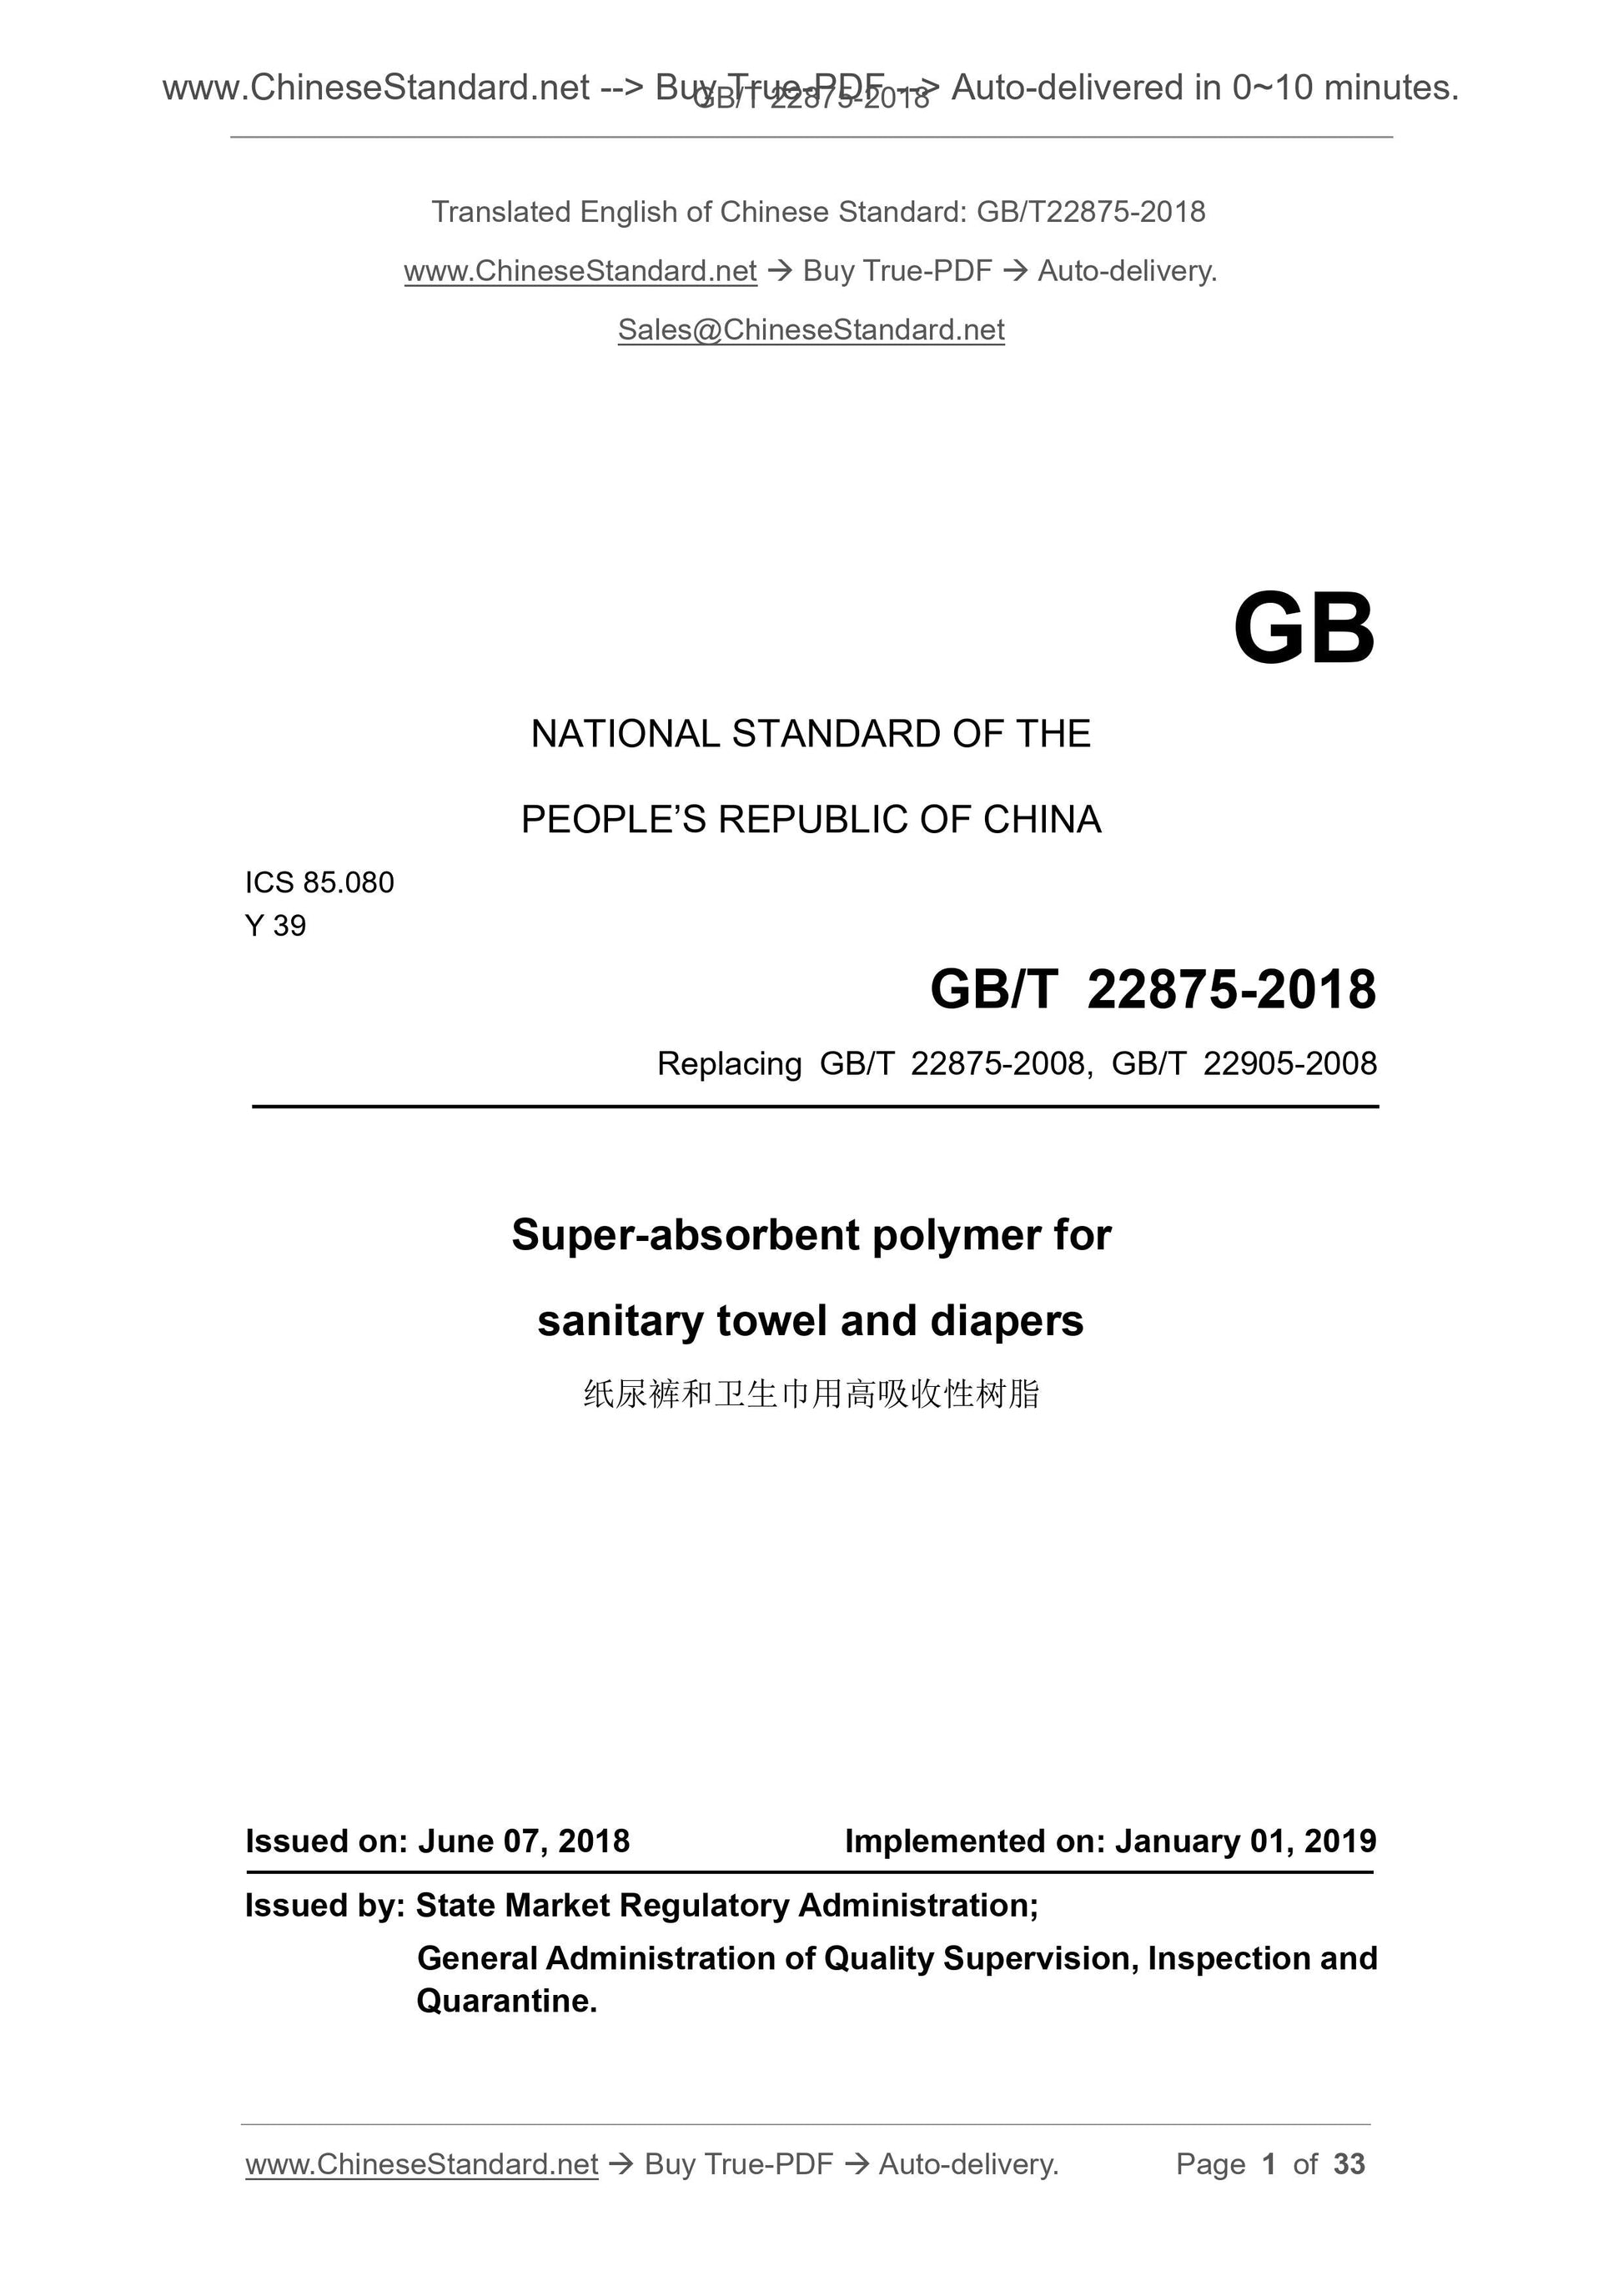 GB/T 22875-2018 Page 1